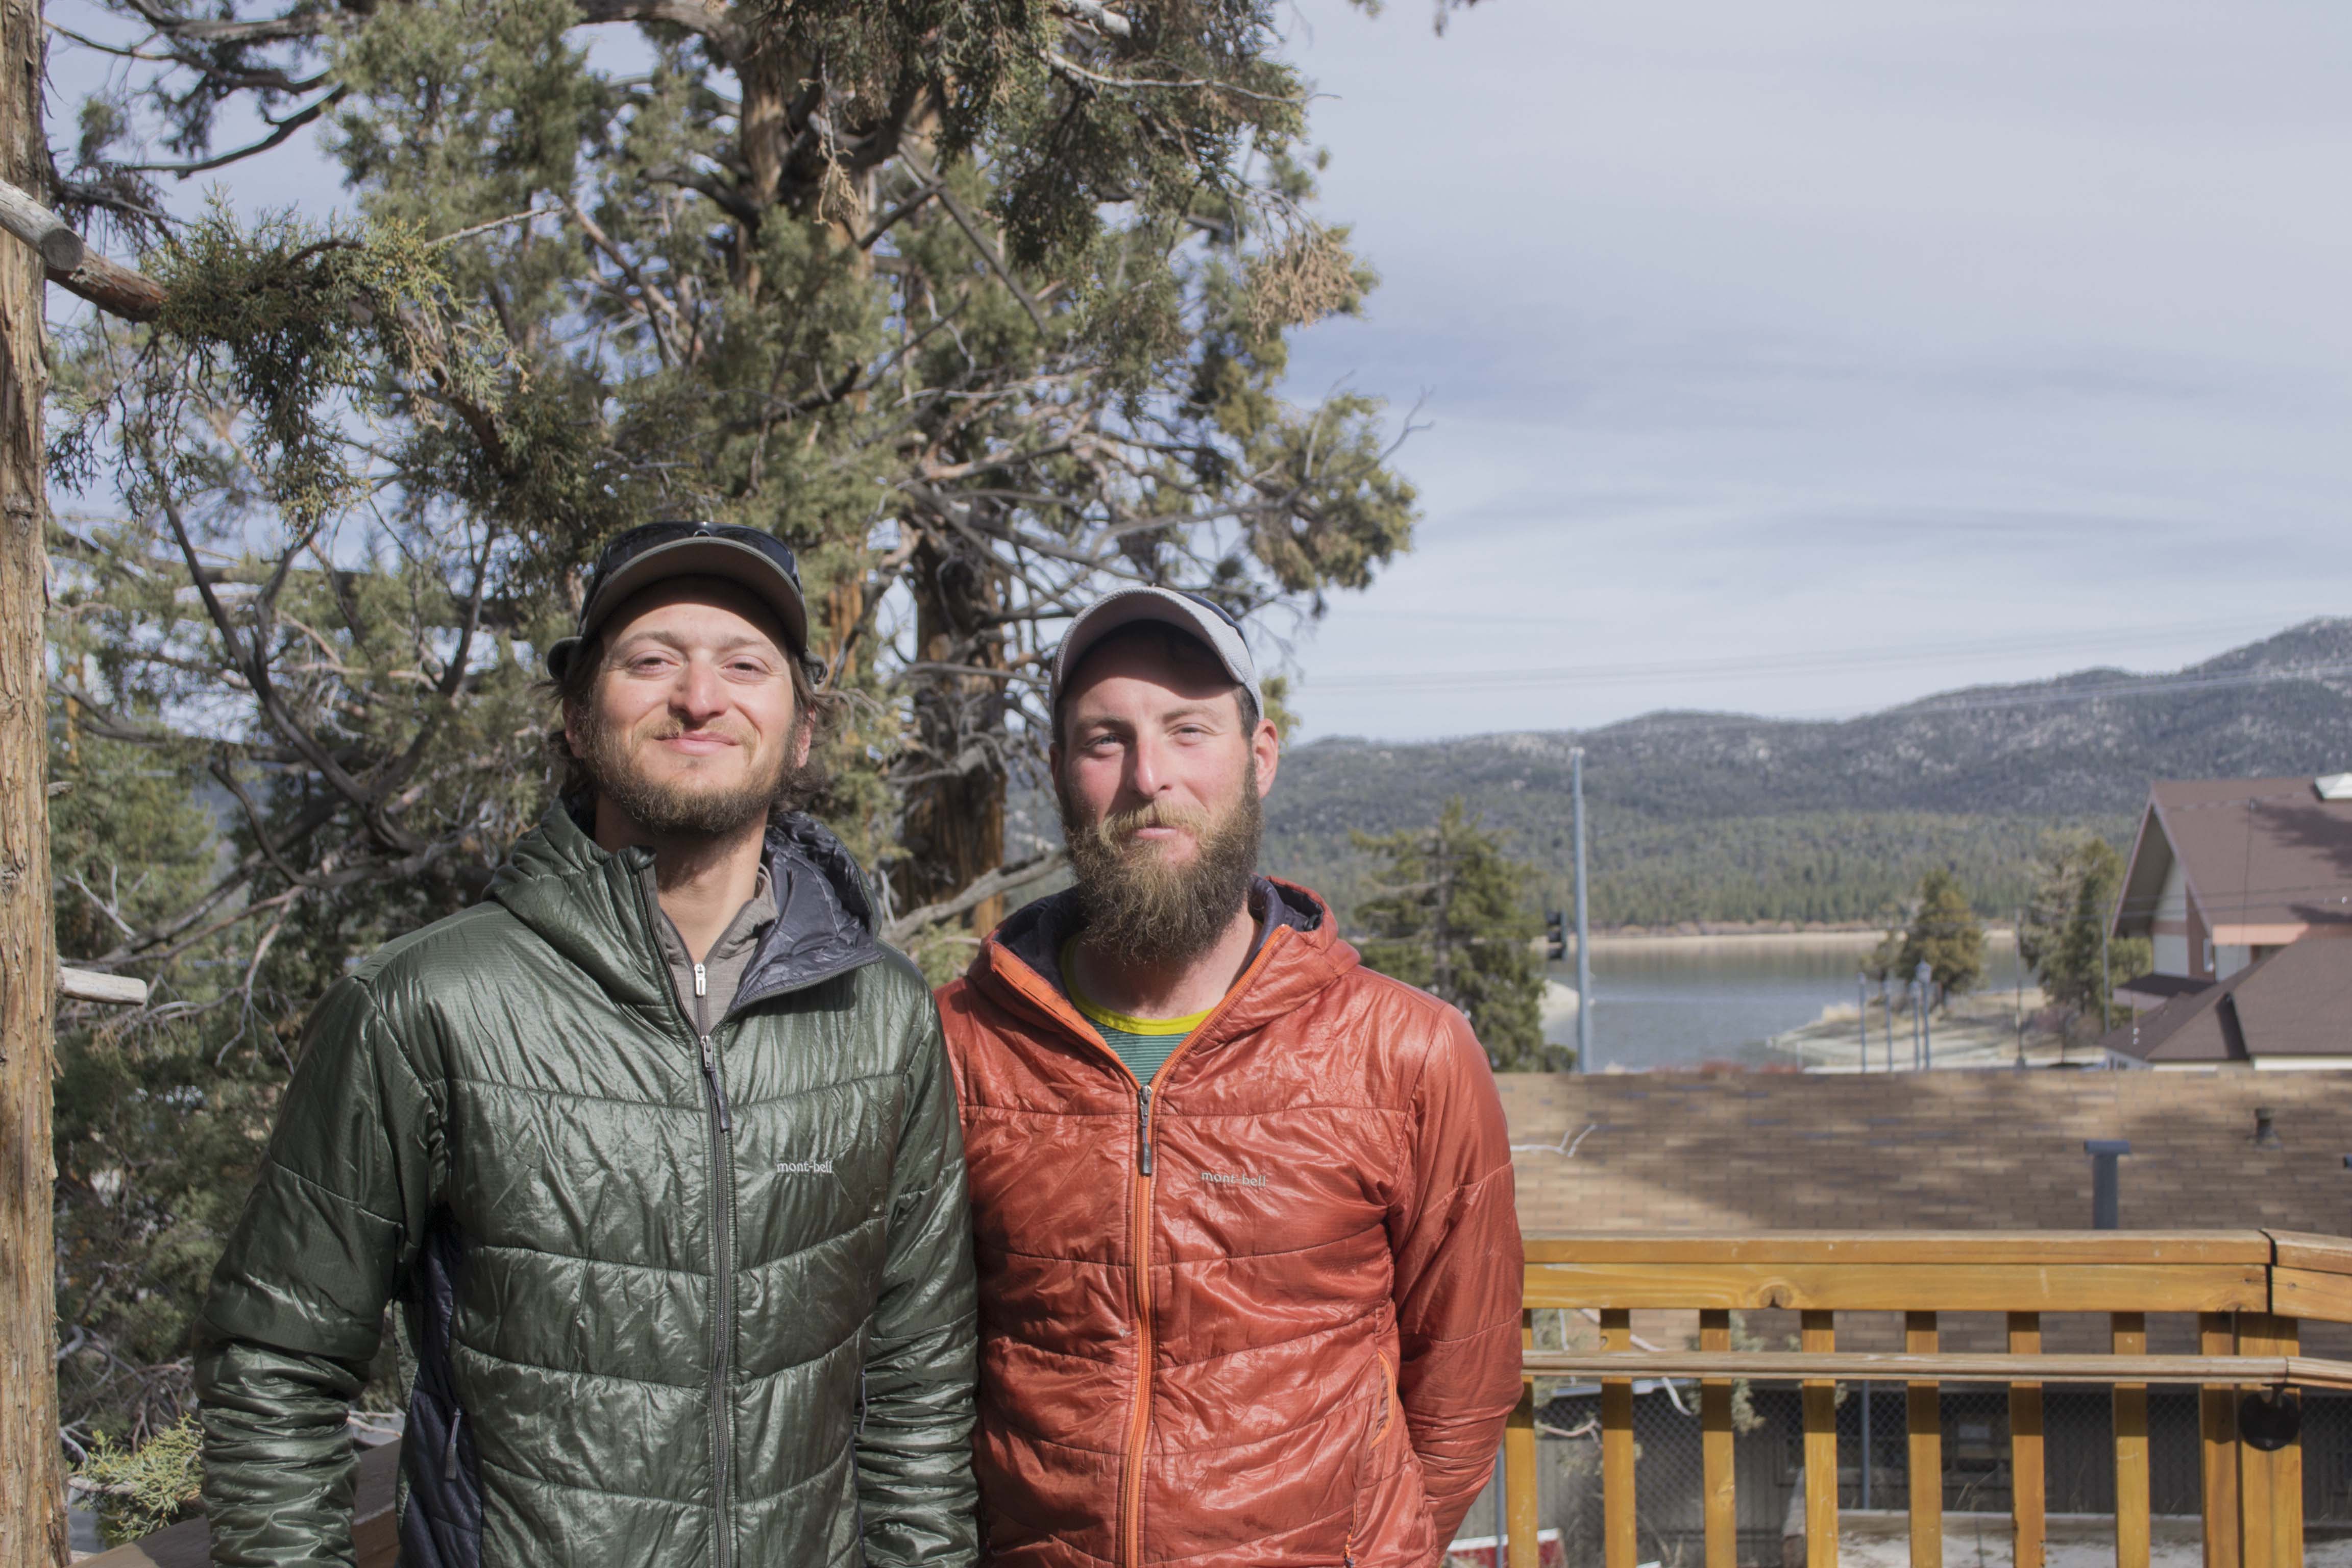 BIG BEAR: Hiking the Pacific Crest Trail like no one before